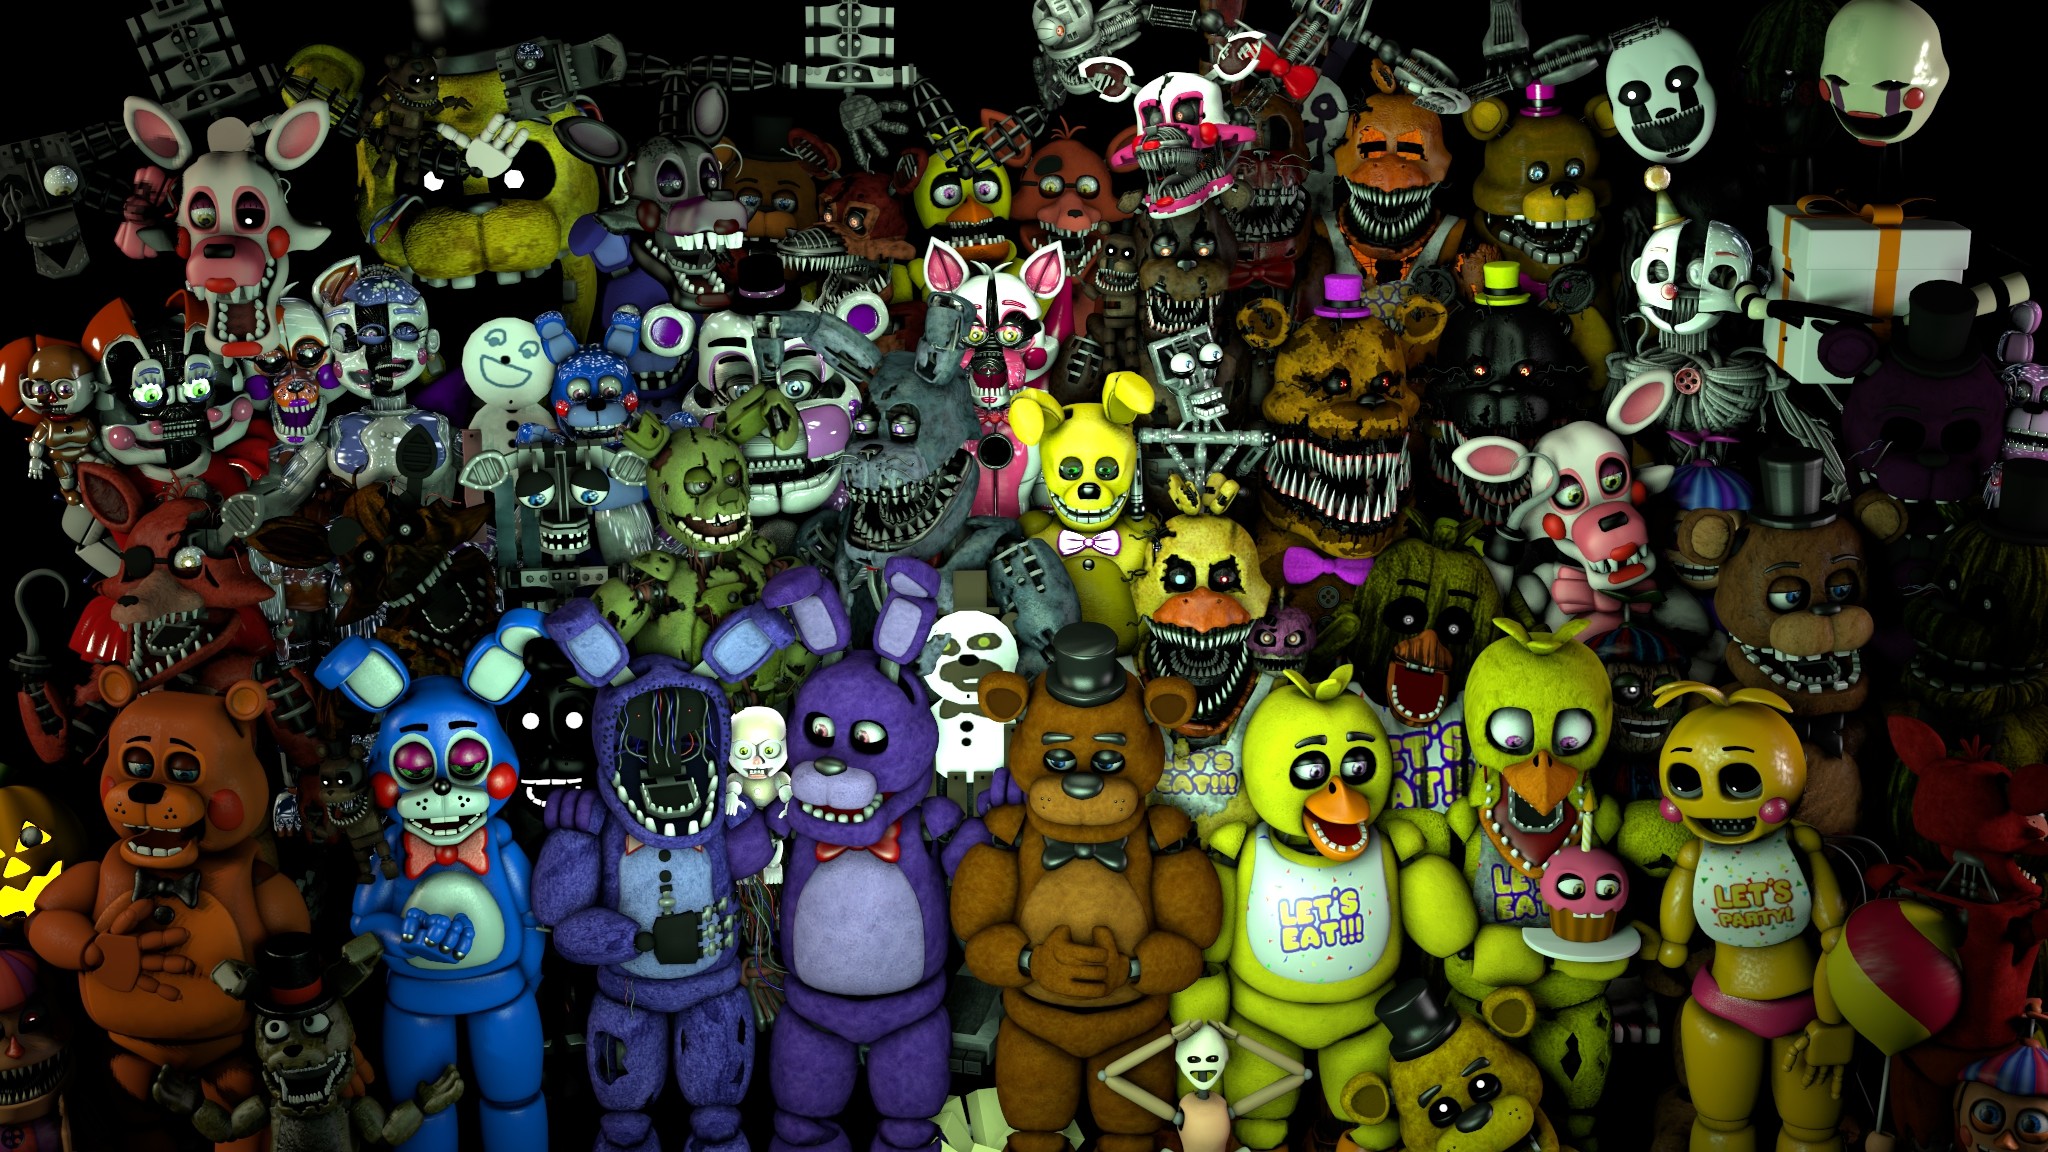 FNaF Mega Poster 2.0 by PixelKirby340 FNaF Mega Poster 2.0 by PixelKirby340